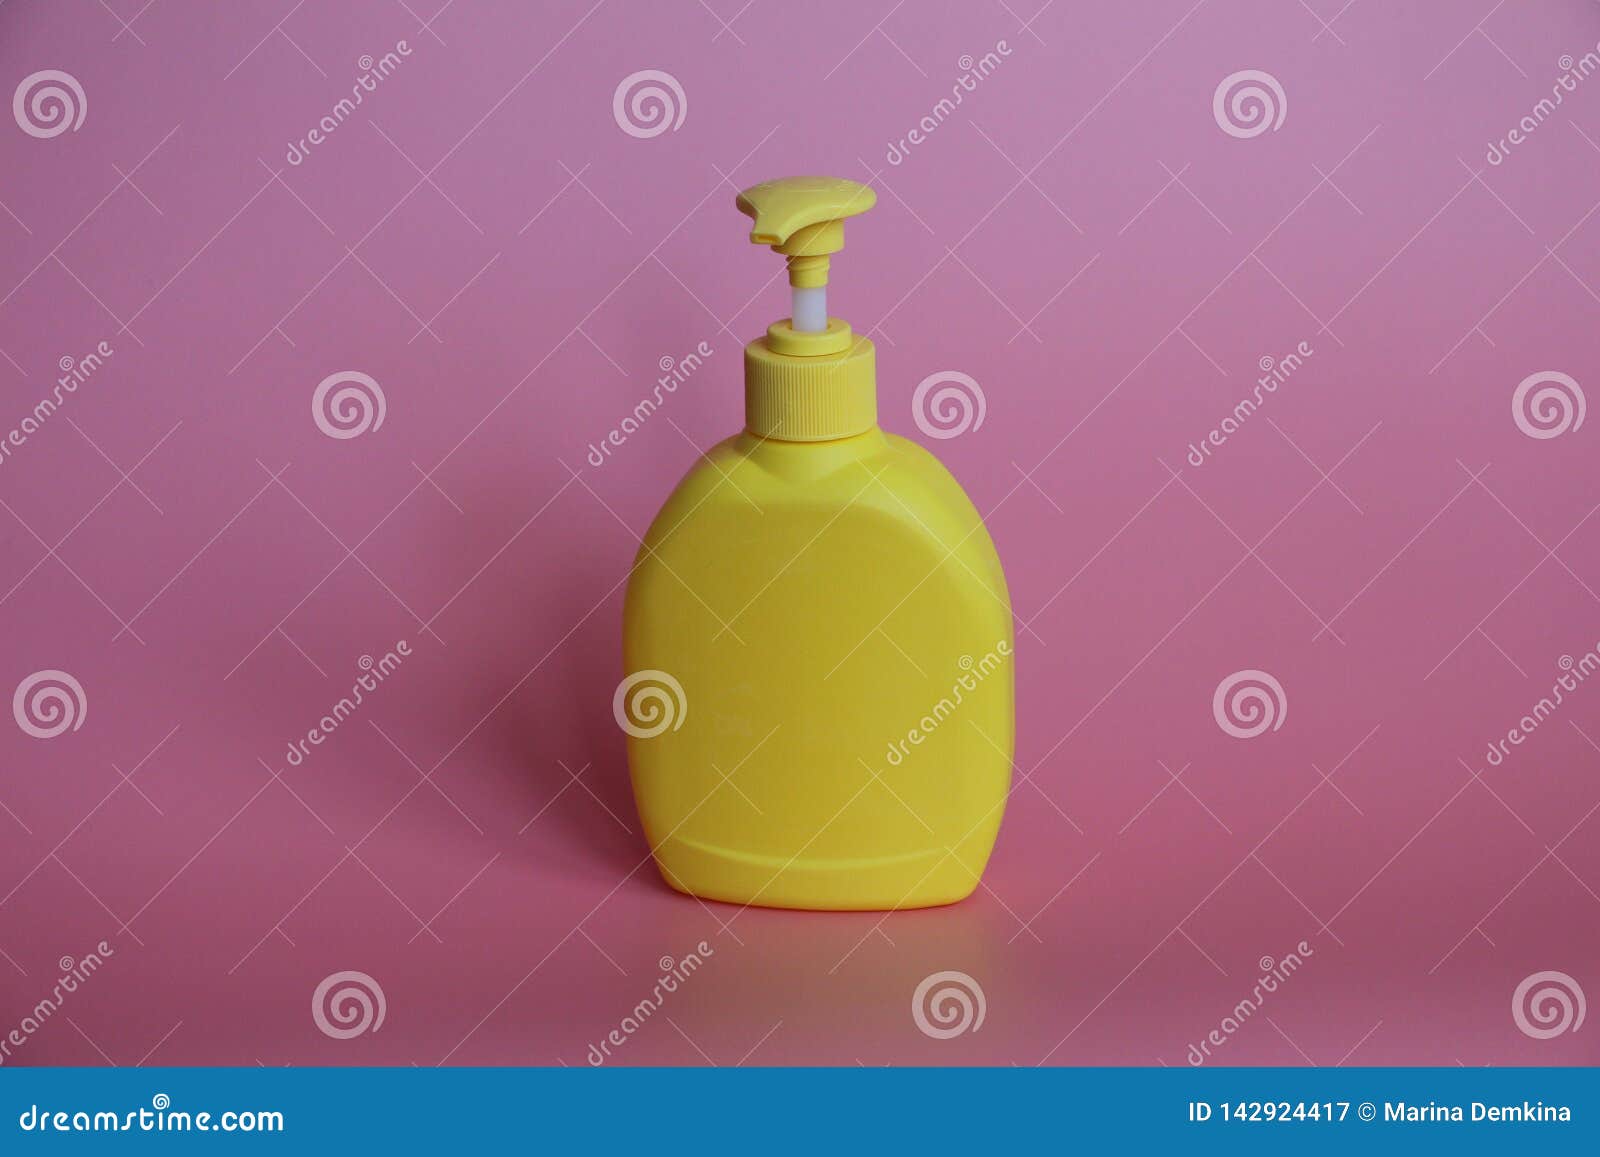 Download Yellow Plastic Bottle On A Pink Background Yellow Bottle With Dispenser Stock Image Image Of Yellow Soap 142924417 Yellowimages Mockups